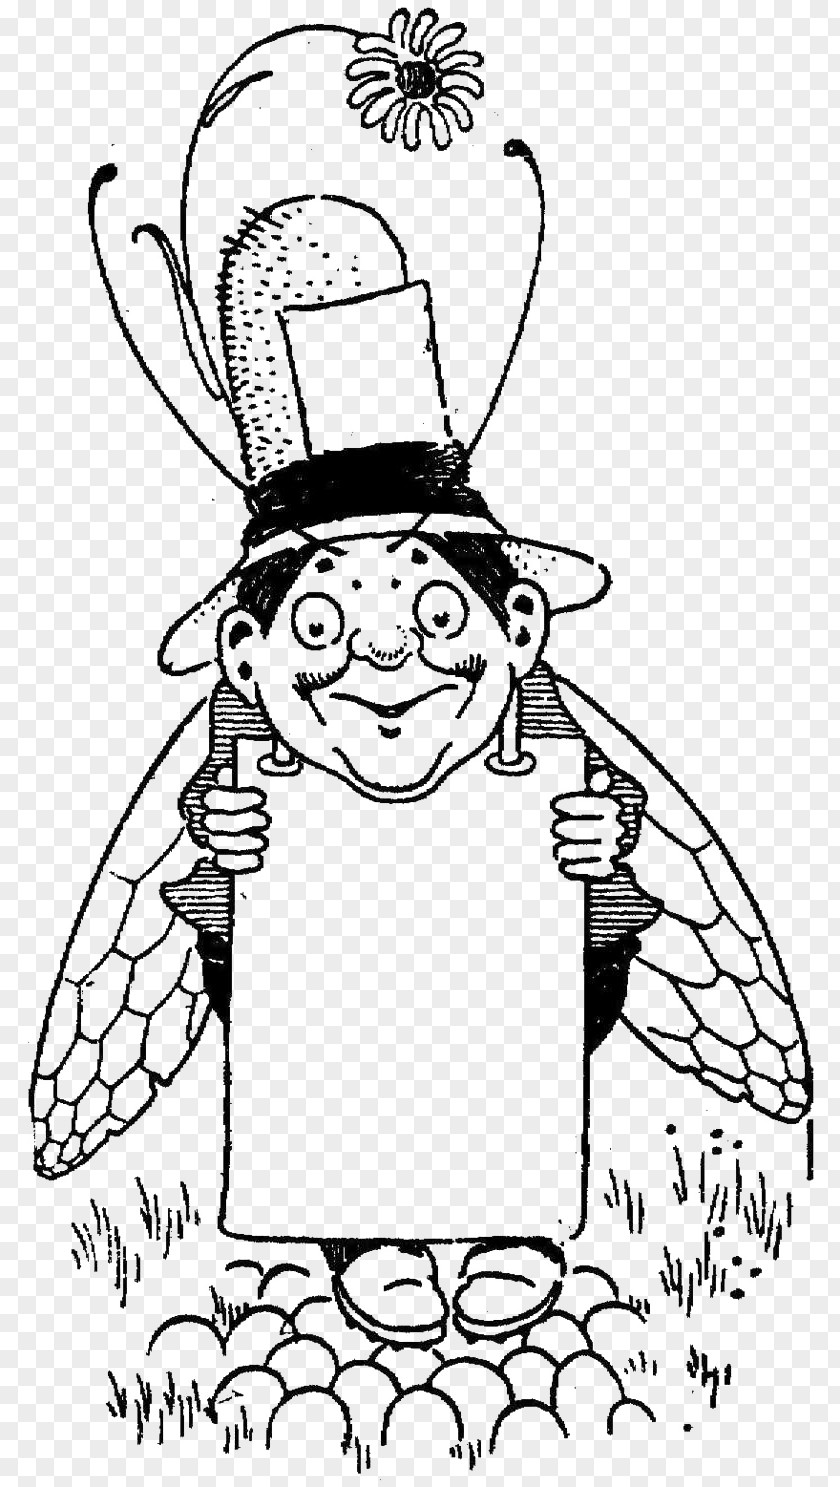 Cartoon Clown Lines Black And White Visual Arts Illustration PNG